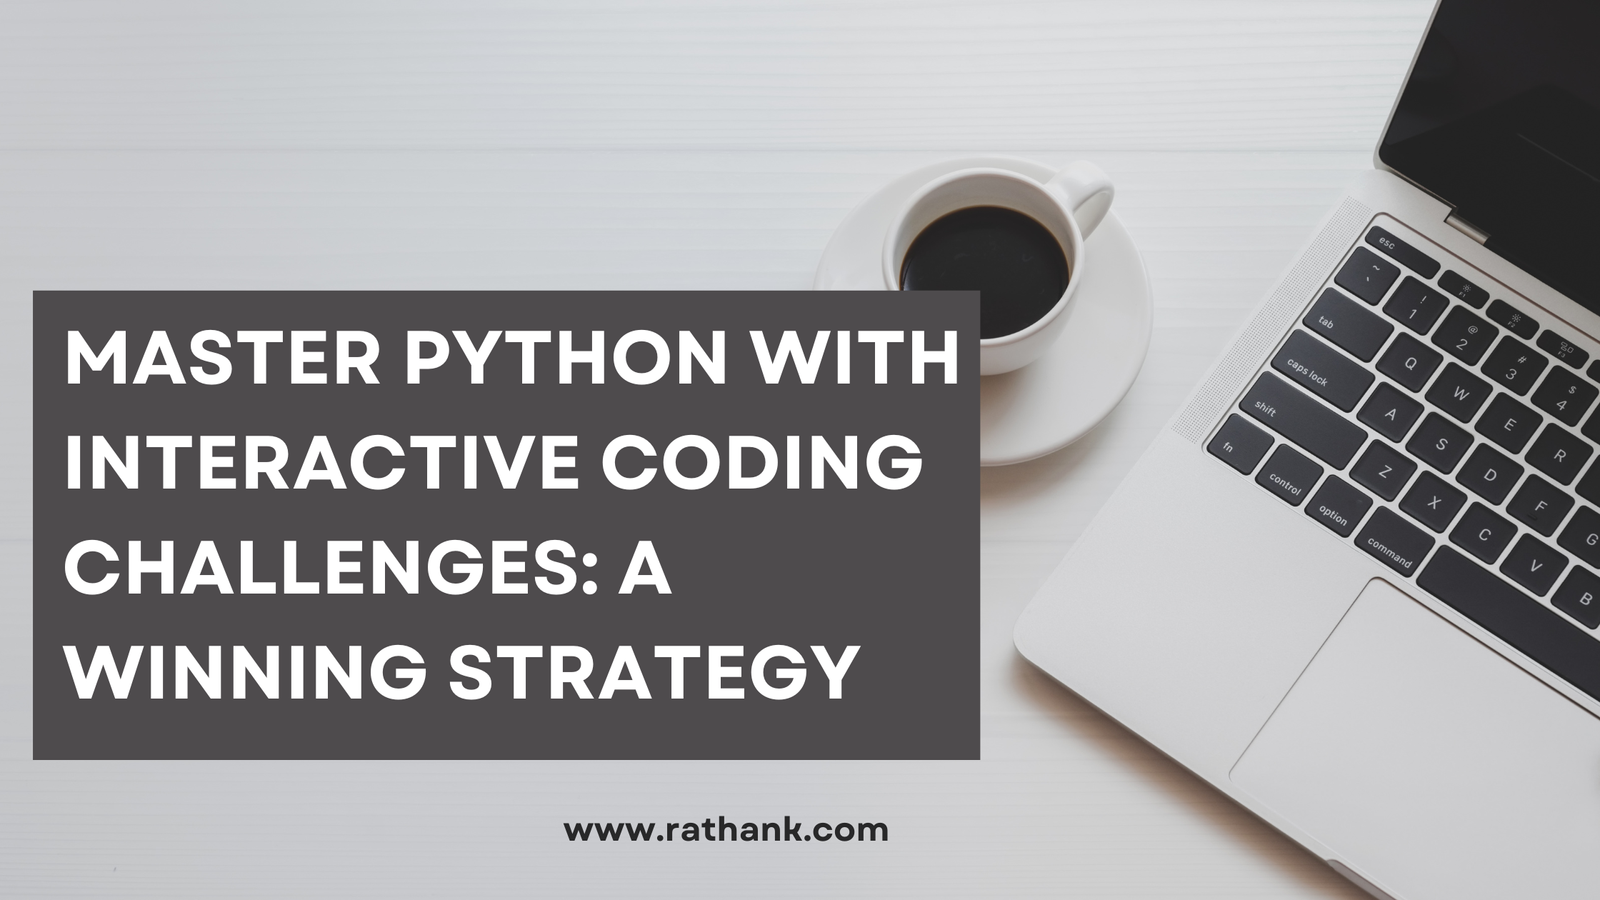 Master Python with Interactive Coding Challenges: A Winning Strategy